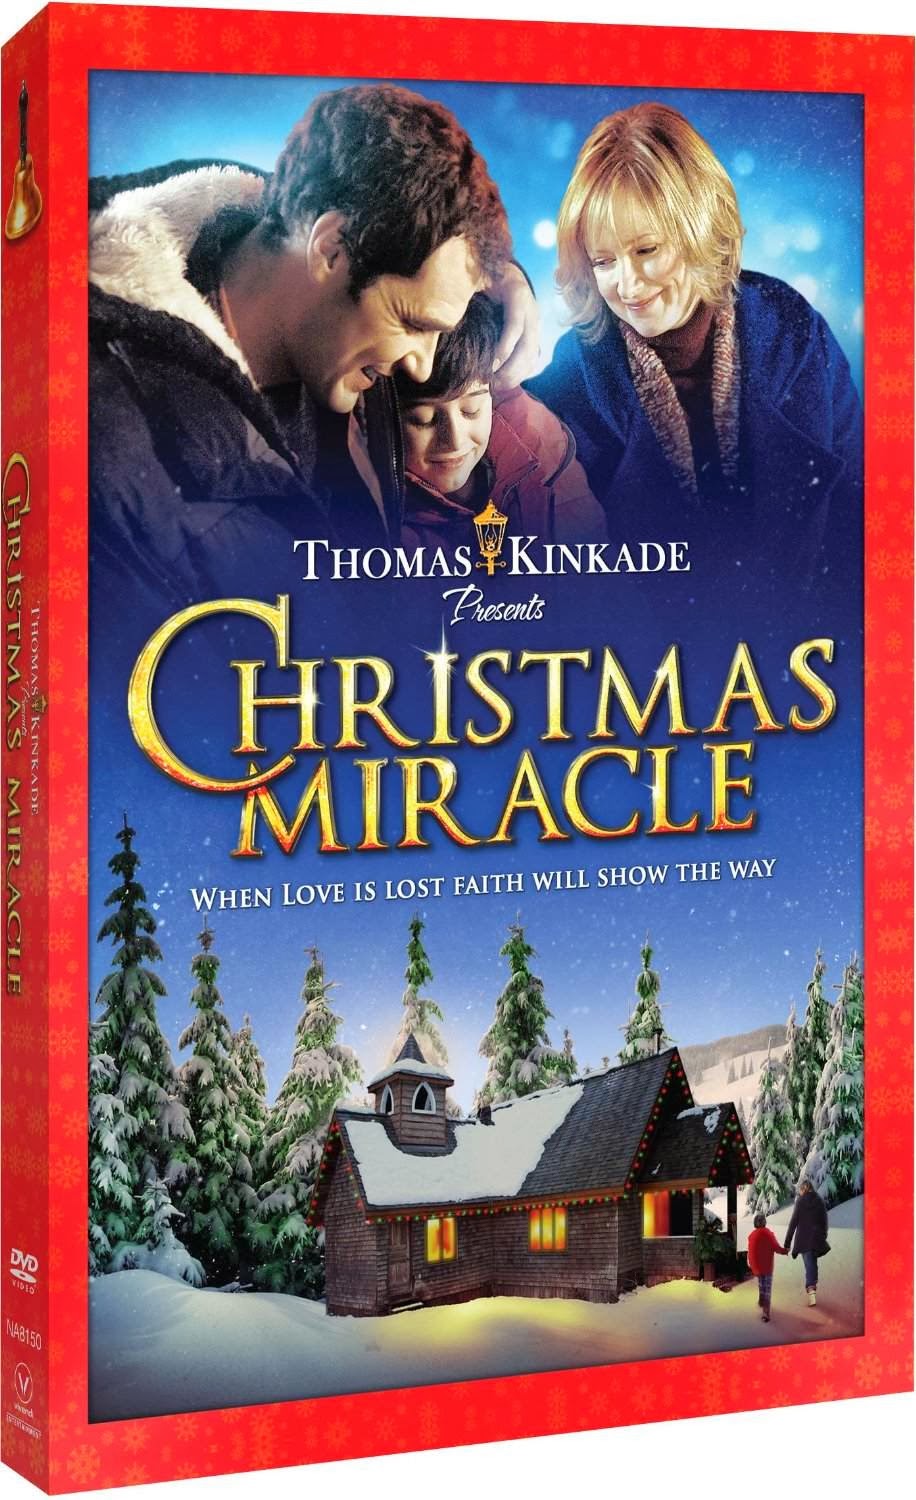 Its a Wonderful Movie - Your Guide to Family and Christmas Movies on TV: Day 4: Don’t miss these ...